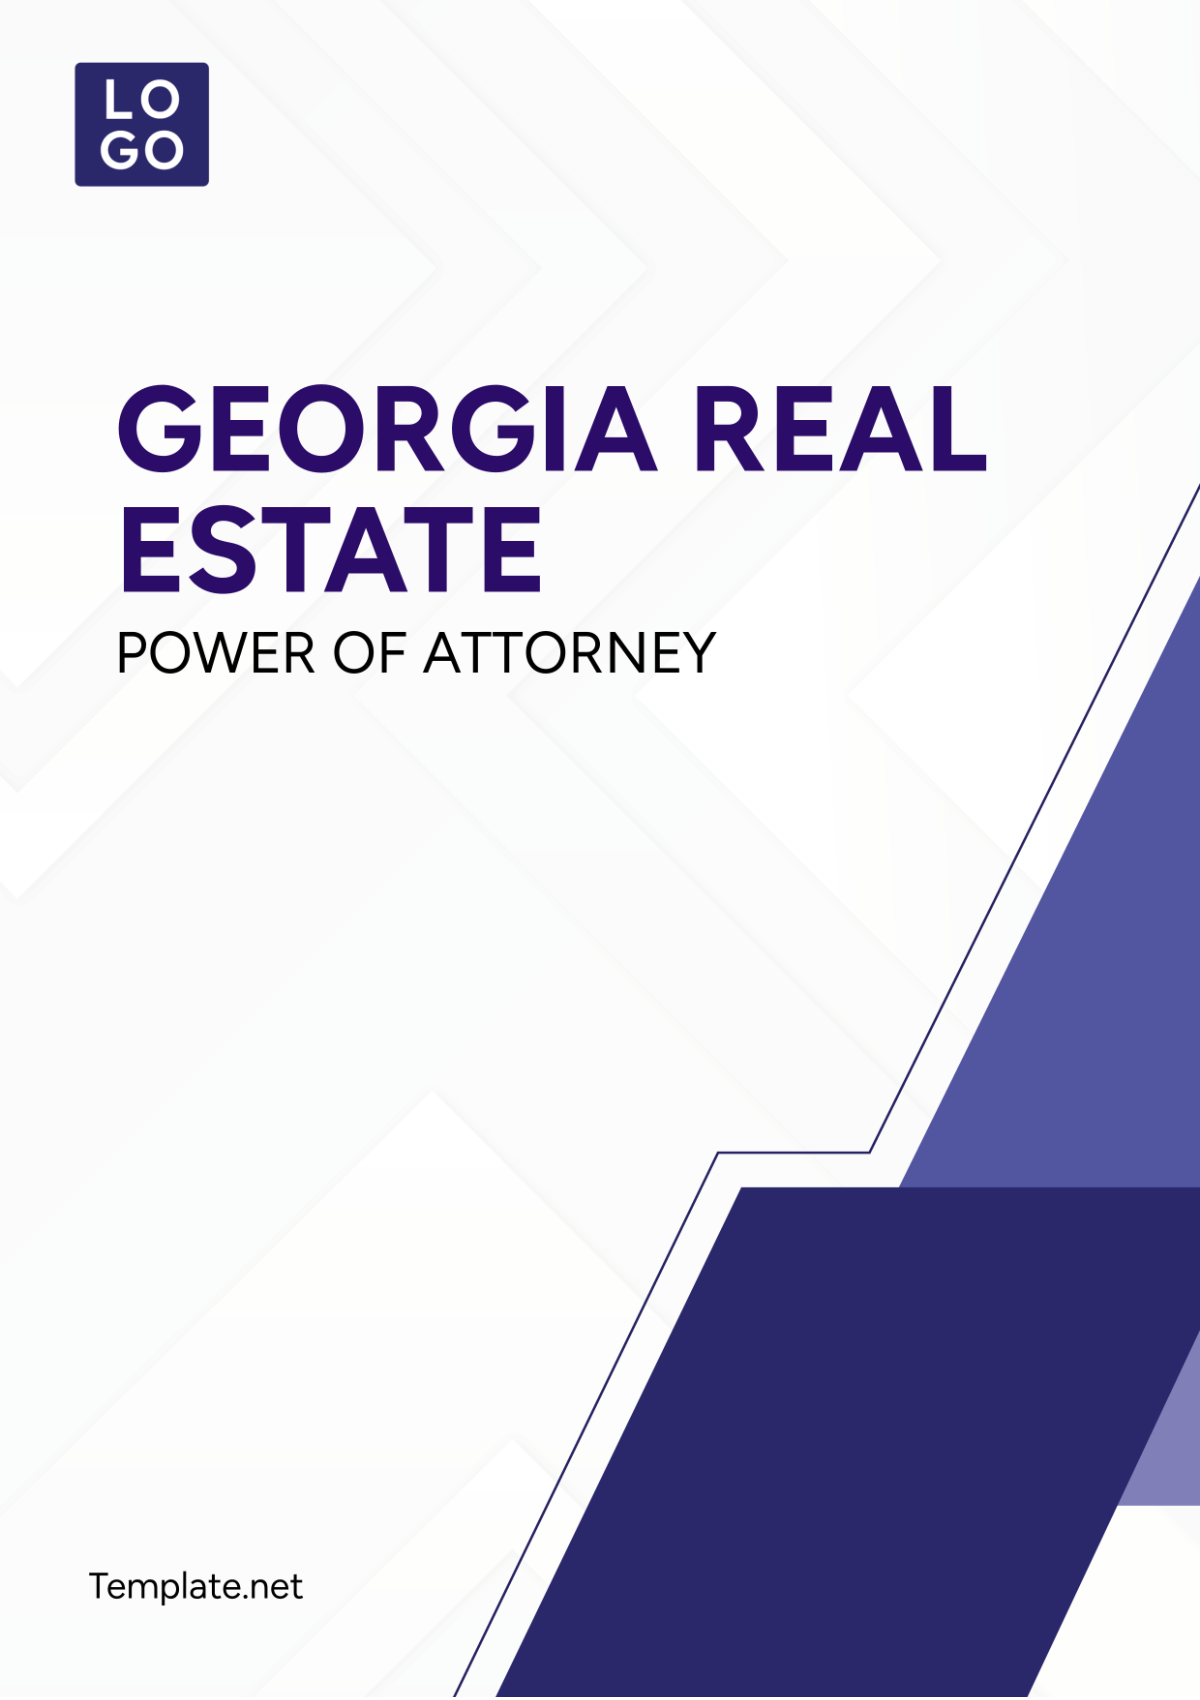 Georgia Real Estate Power of Attorney Template